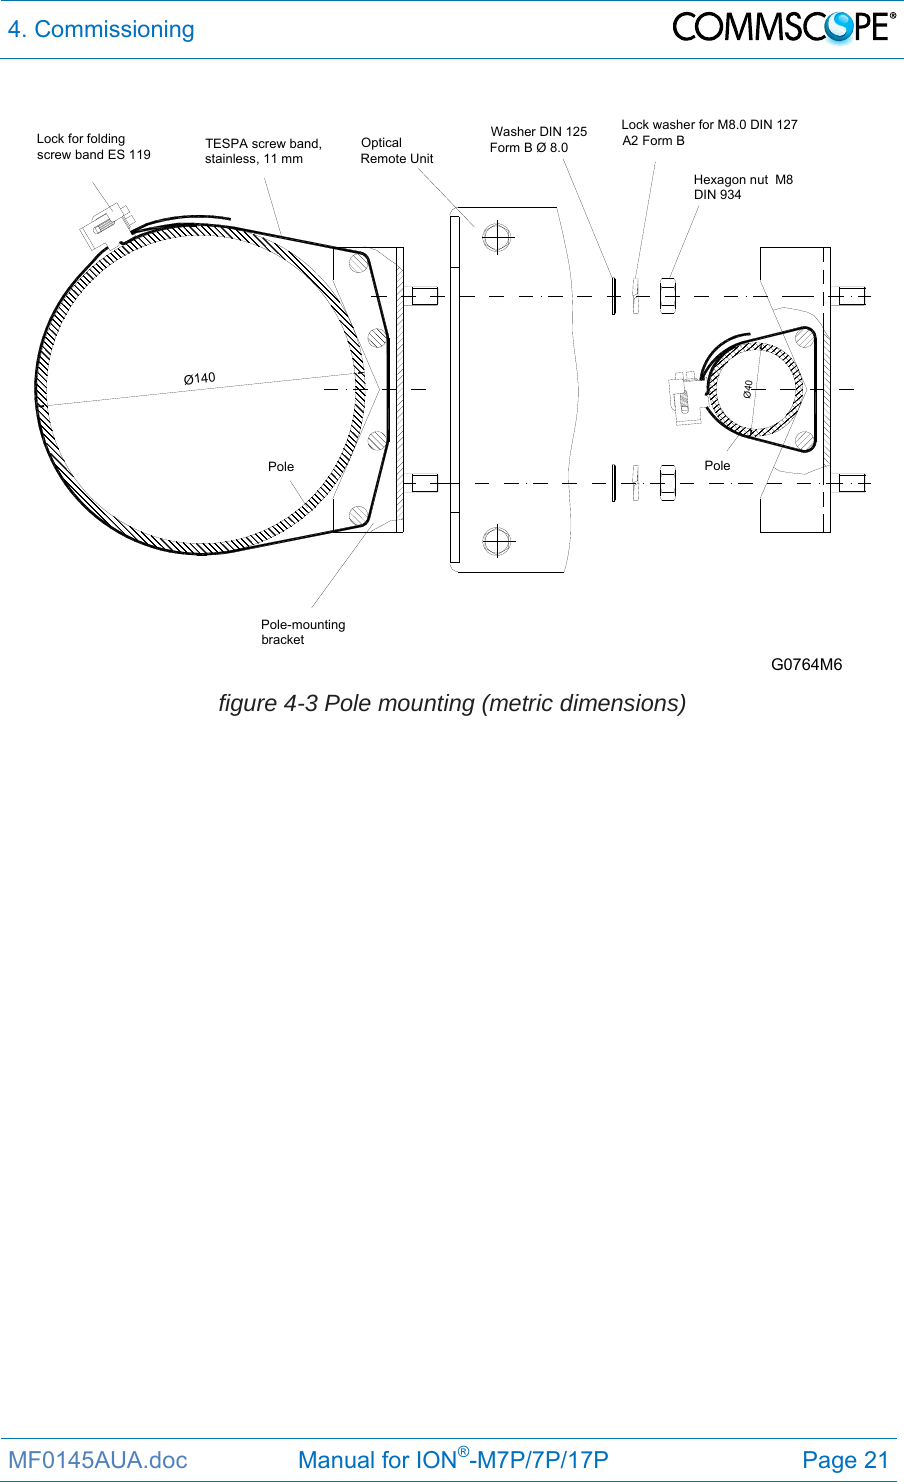 4. Commissioning  MF0145AUA.doc                 Manual for ION®-M7P/7P/17P Page 21  G0764M6Lock for folding screw band ES 119 TESPA screw band, stainless, 11 mm Optical Remote UnitWasher DIN 125 Form B Ø 8.0Lock washer for M8.0 DIN 127 A2 Form B Hexagon nut  M8 DIN 934PolePolePole-mounting bracketØ140Ø40 figure 4-3 Pole mounting (metric dimensions)  